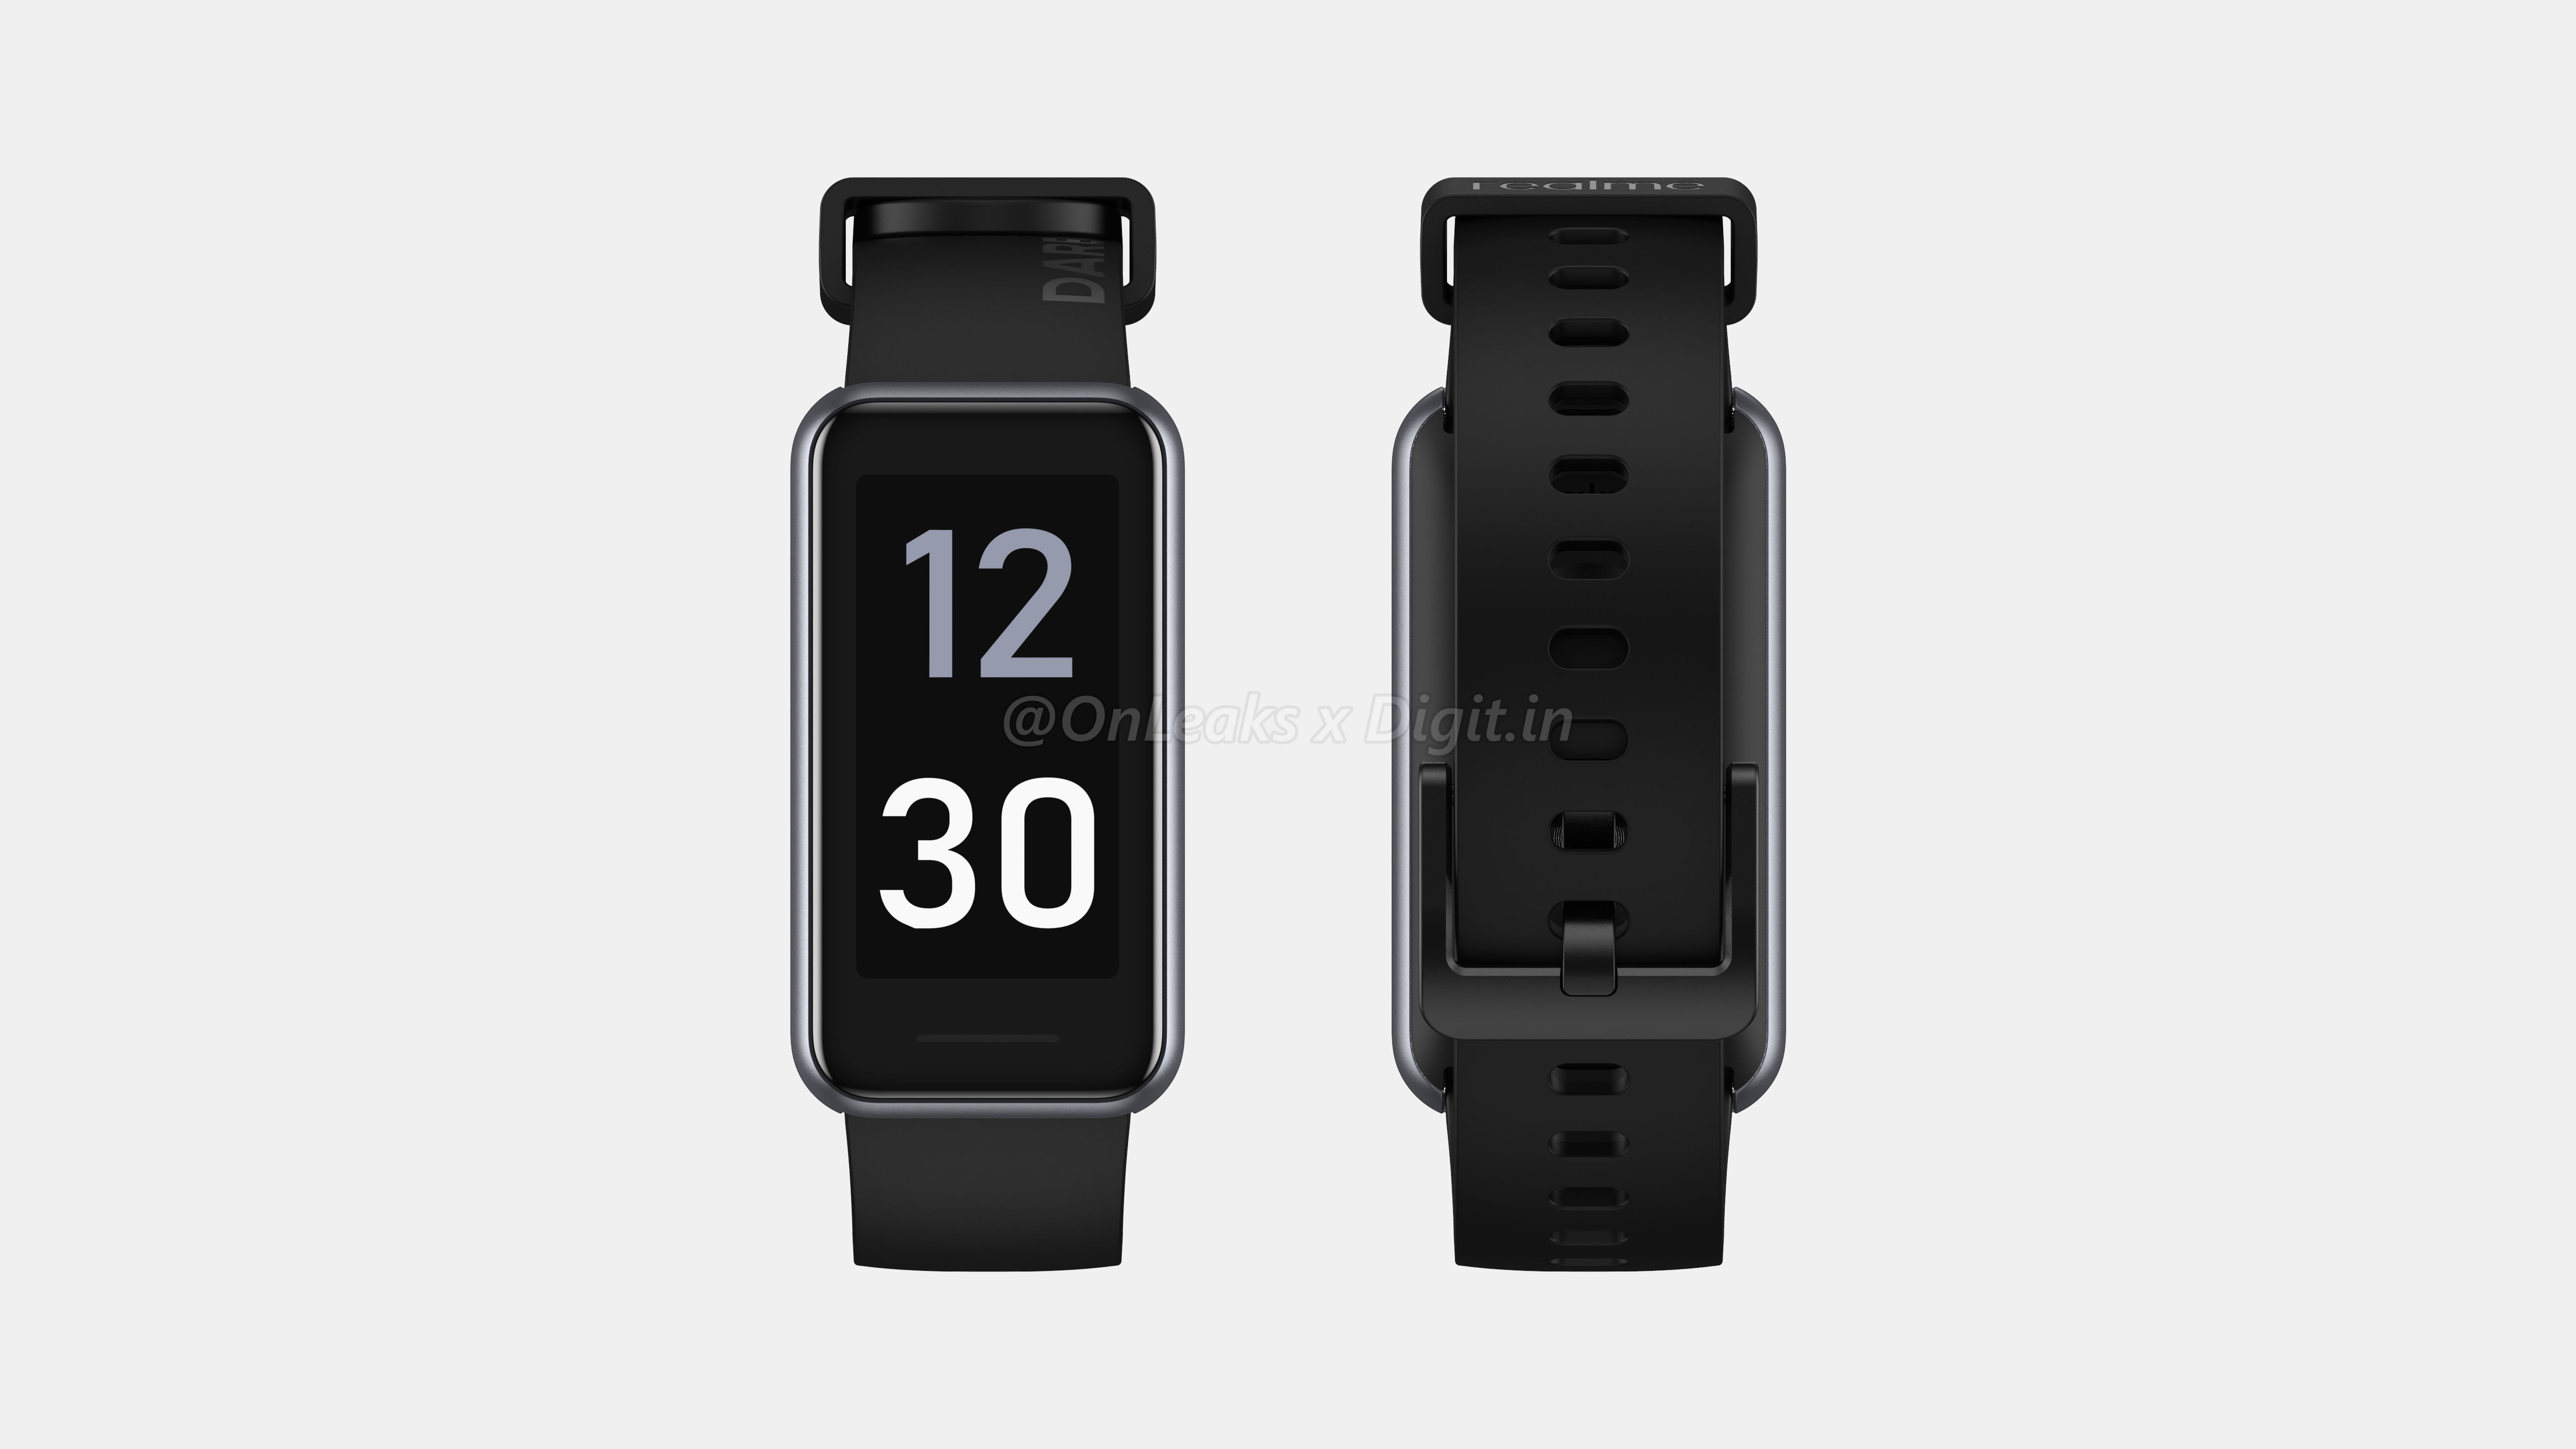 First look at Realme Band 2 shows a totally revamped design - Gizmochina